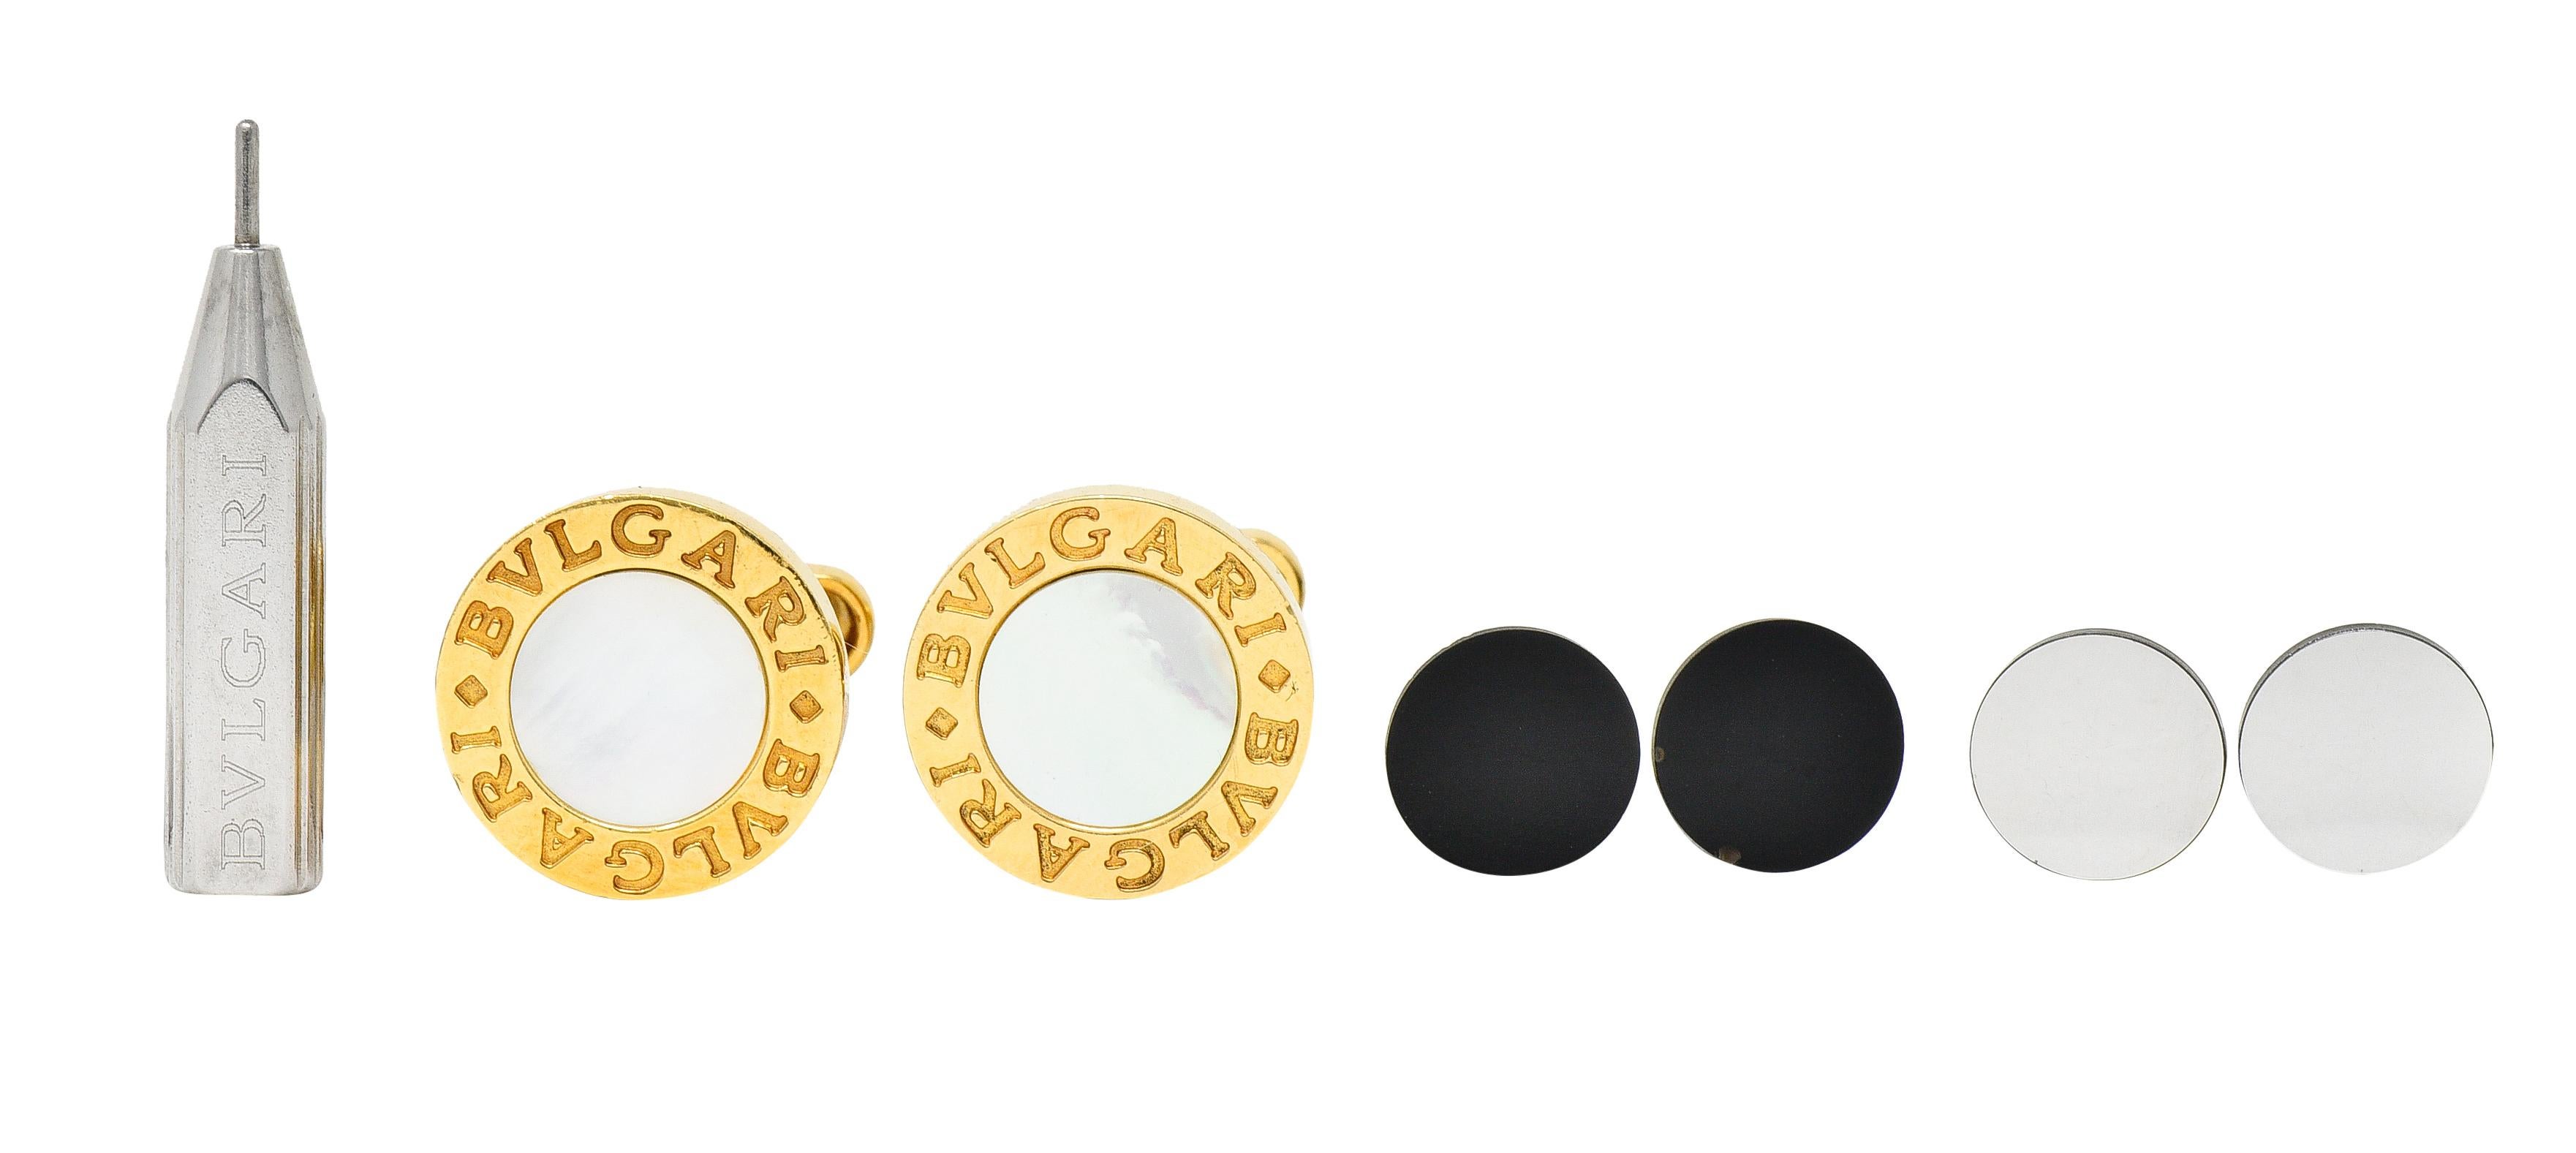 Leverback cufflinks terminate as a hinged bar and feature 16.0 mm round forms. Centering flushly inlaid 10.0 mm round tablets of onyx, white mother-of-pearl, and/or steel. Opaque black, strongly iridescent, and with a metallic luster. Changeable via